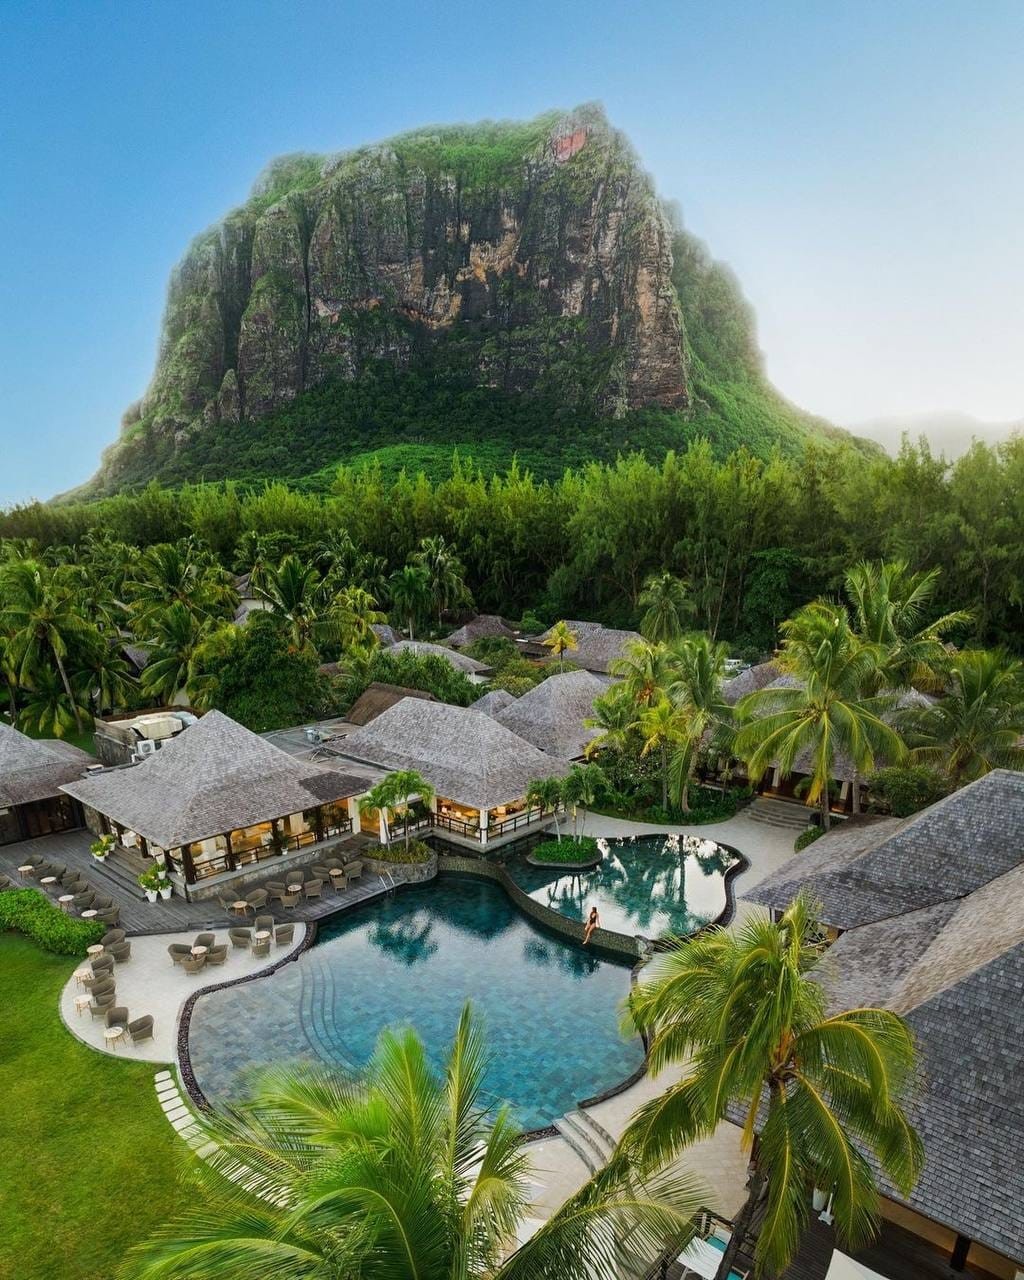 Mauritius enjoys a tropical climate with relatively consistent temperatures and humidity throughout the year. Generally, the best time to visit is between May and December